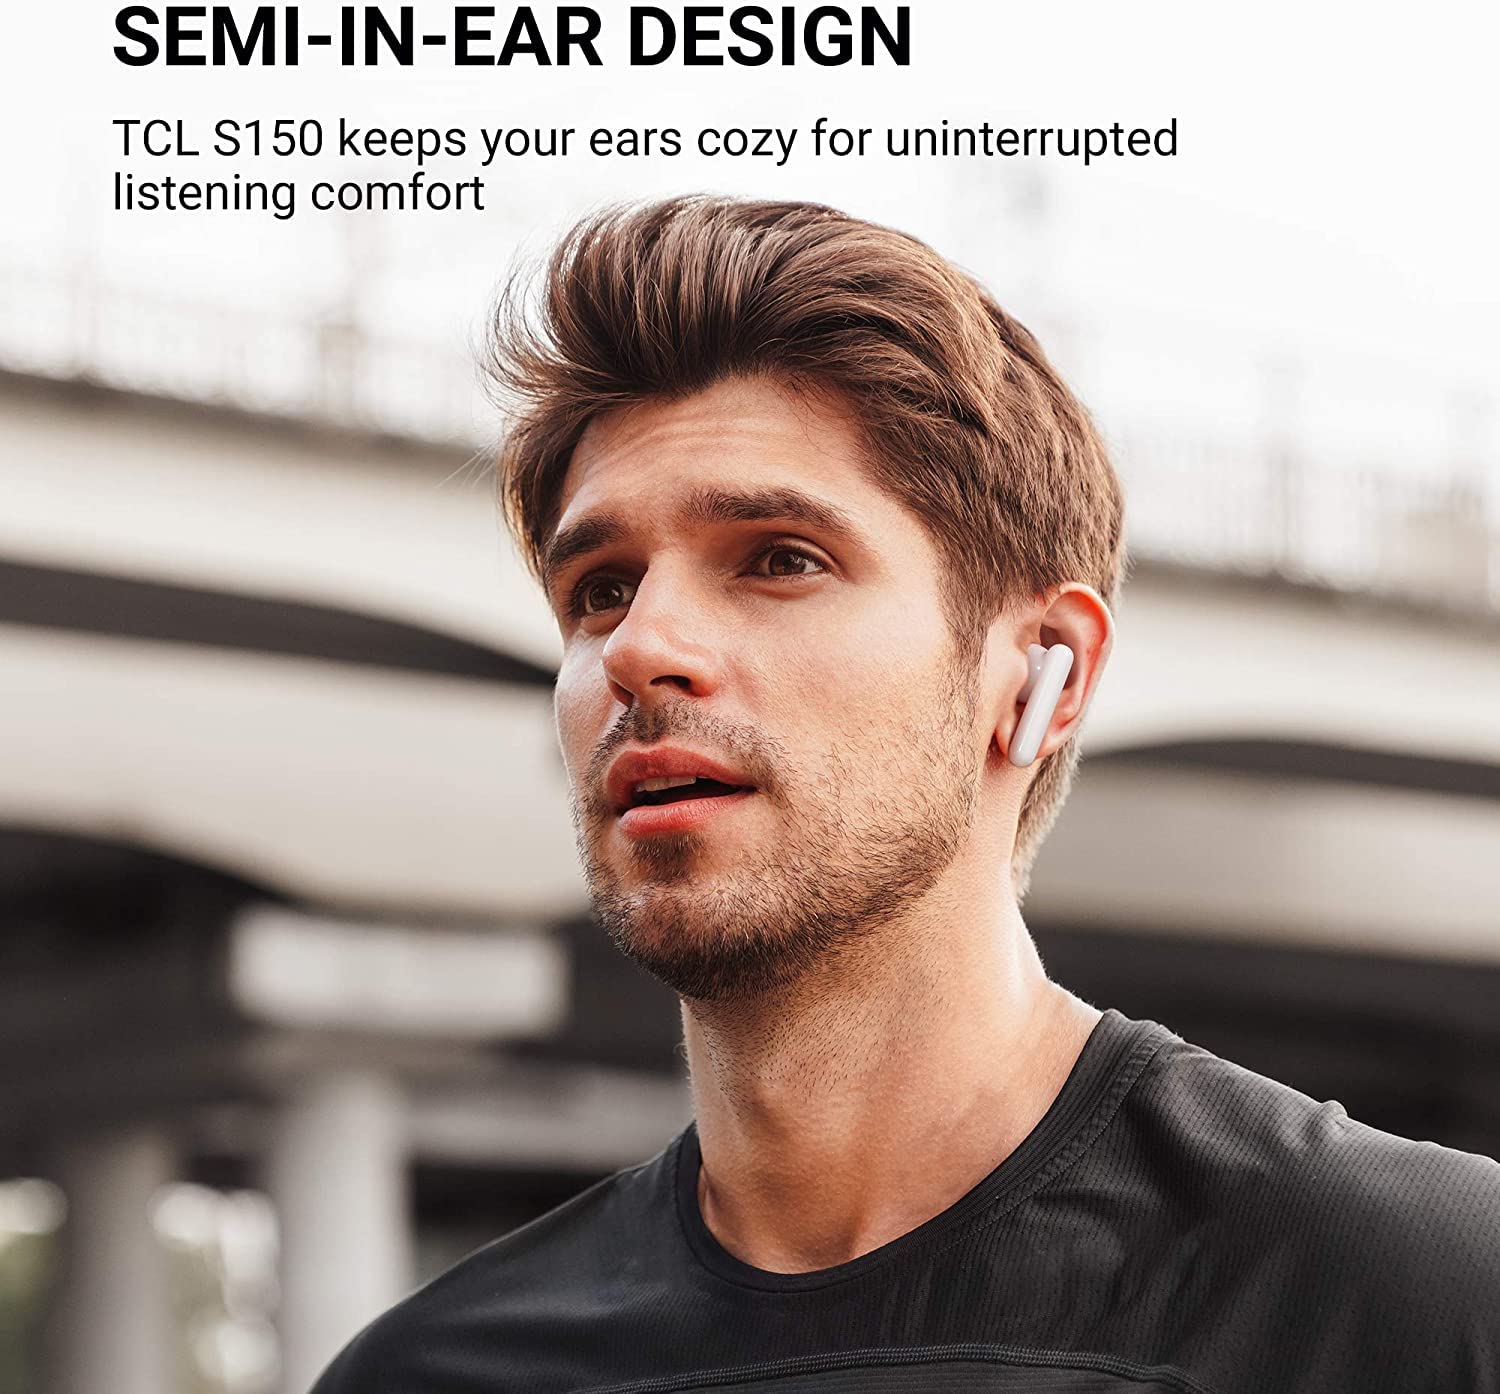 TCL S150 True Wireless Earbuds, Deep Bass with 13mm Drivers, Bluetooth 5.0 Headphones, Type C Charging Case, Noise Isolation, Waterproof Touch Control Wireless Earphones with Mic for Work, White